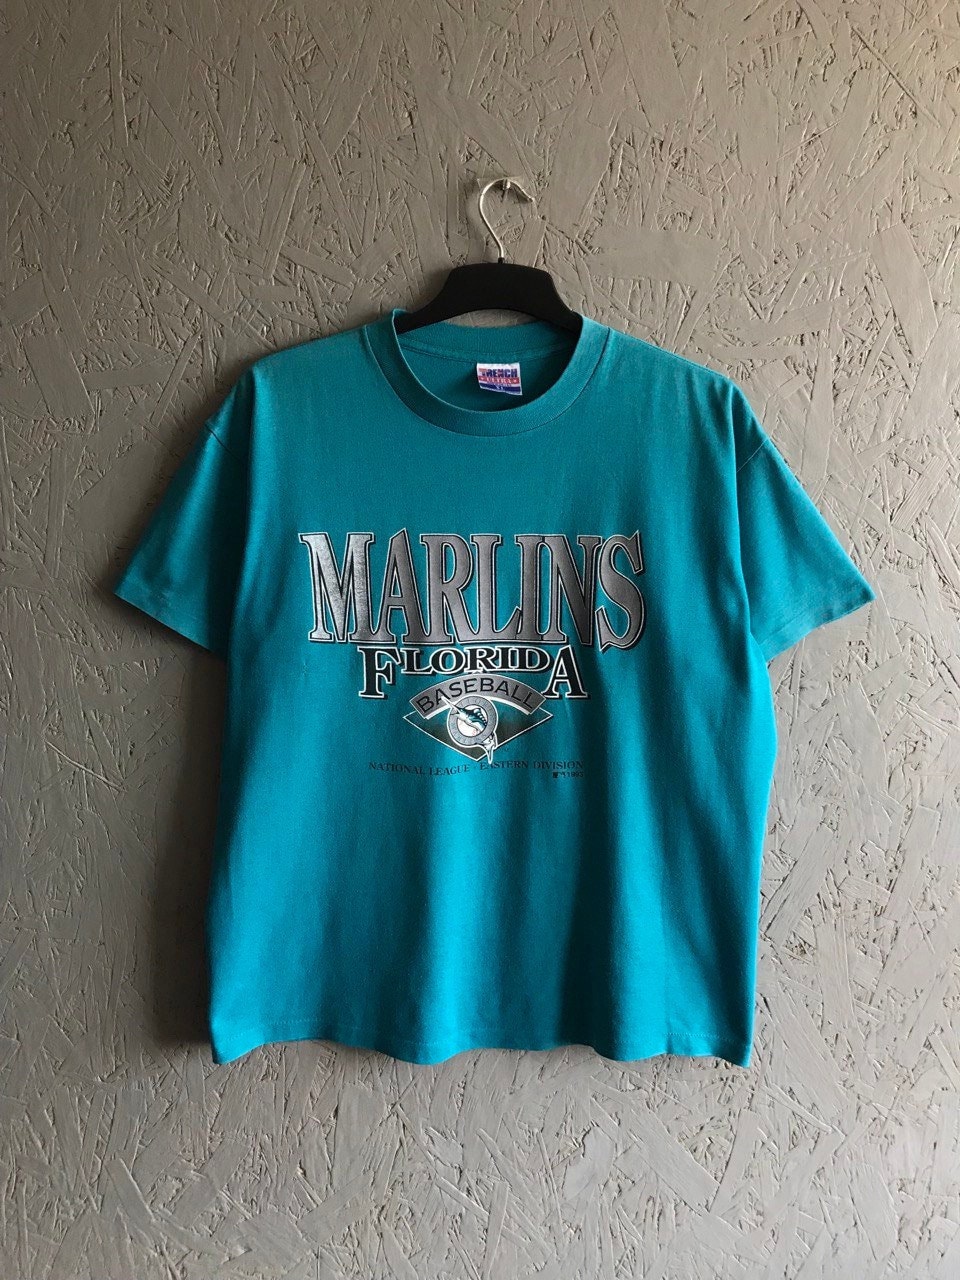  Custom Baseball Jersey City Connect Shirt Personalized Name  Number for Men Women Kids (Marlin) : Clothing, Shoes & Jewelry